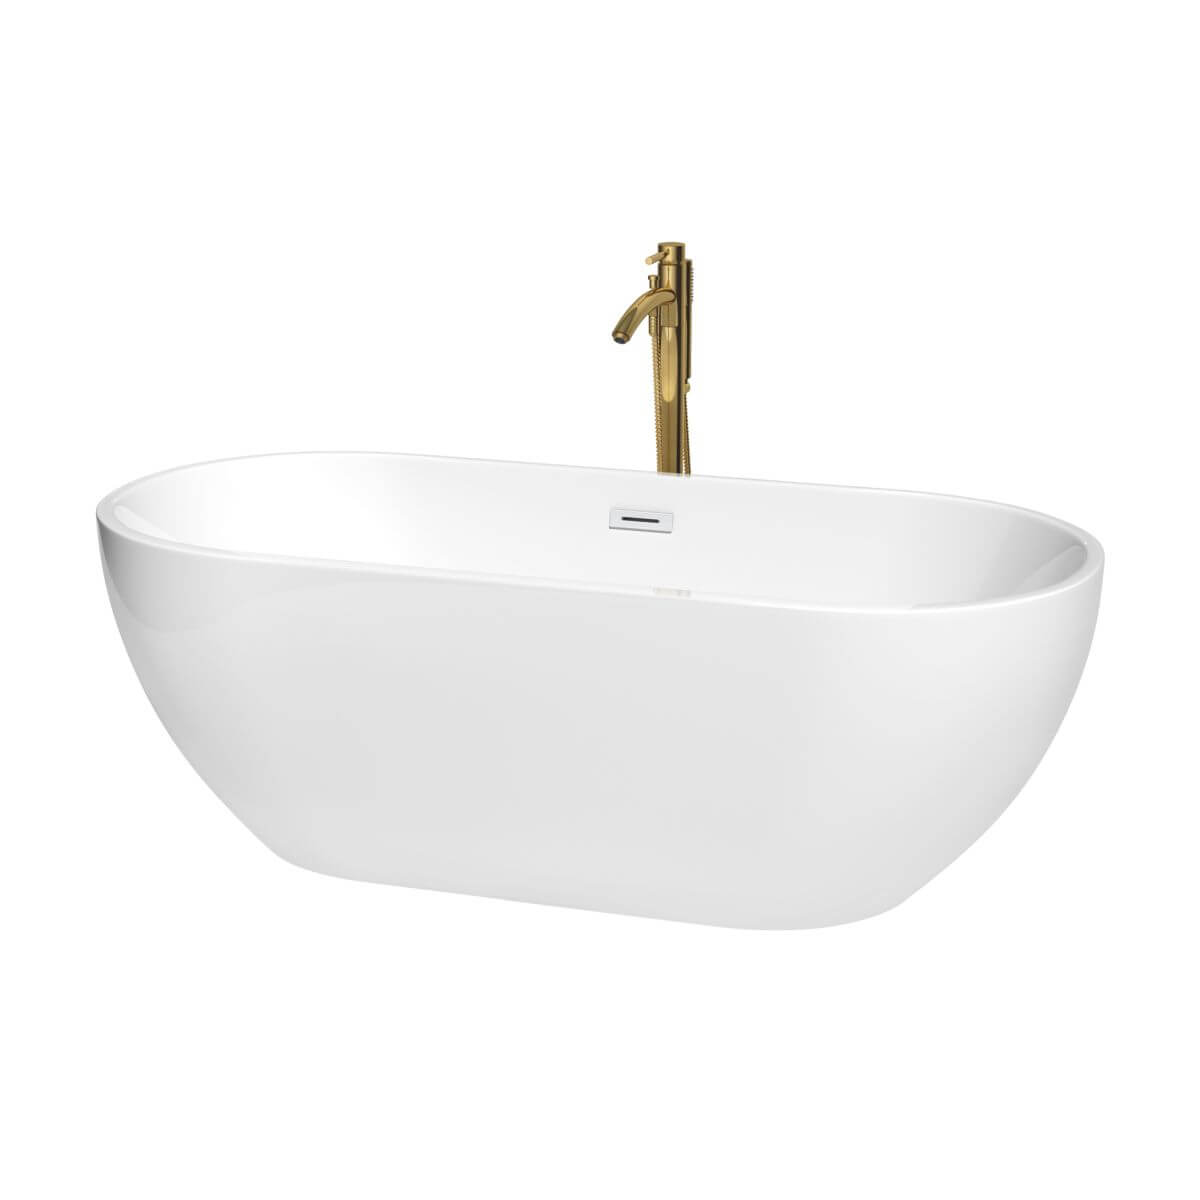 Wyndham Collection Brooklyn 67 inch Freestanding Bathtub in White with Shiny White Trim and Floor Mounted Faucet in Brushed Gold - WCOBT200067SWATPGD